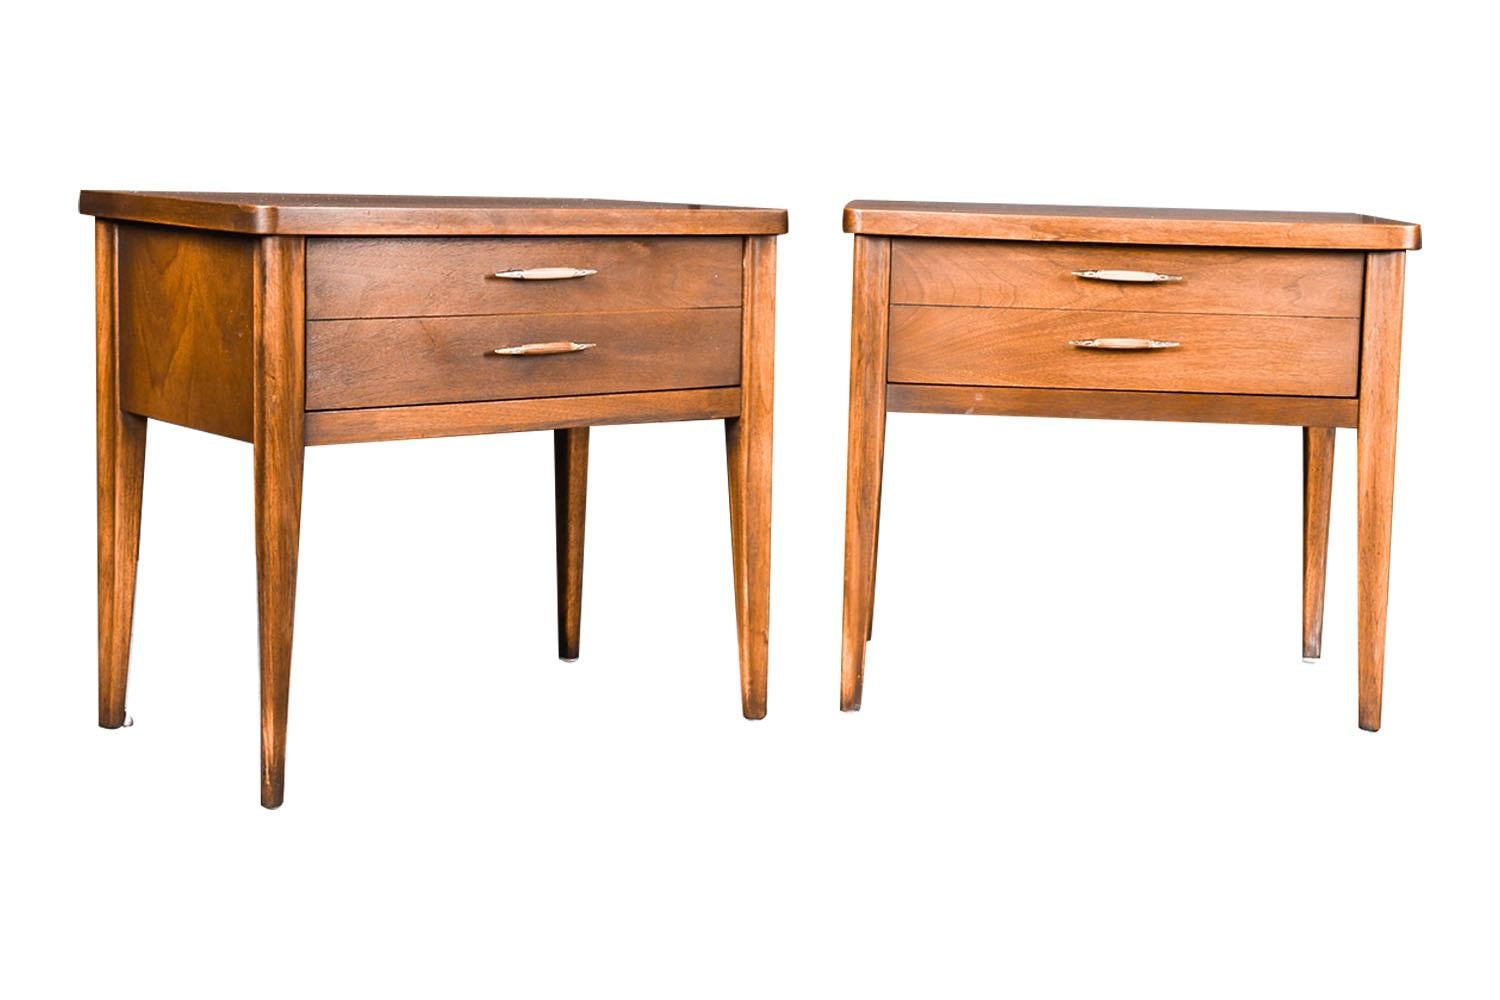 A beautiful pair of vintage, impressive and sleek Mid-Century Modern walnut, nightstands or end tables, circa early 1960s from Broyhill Premier’s “Saga” collection. These absolute jewels remain in nearly pristine condition. The lines are clean and